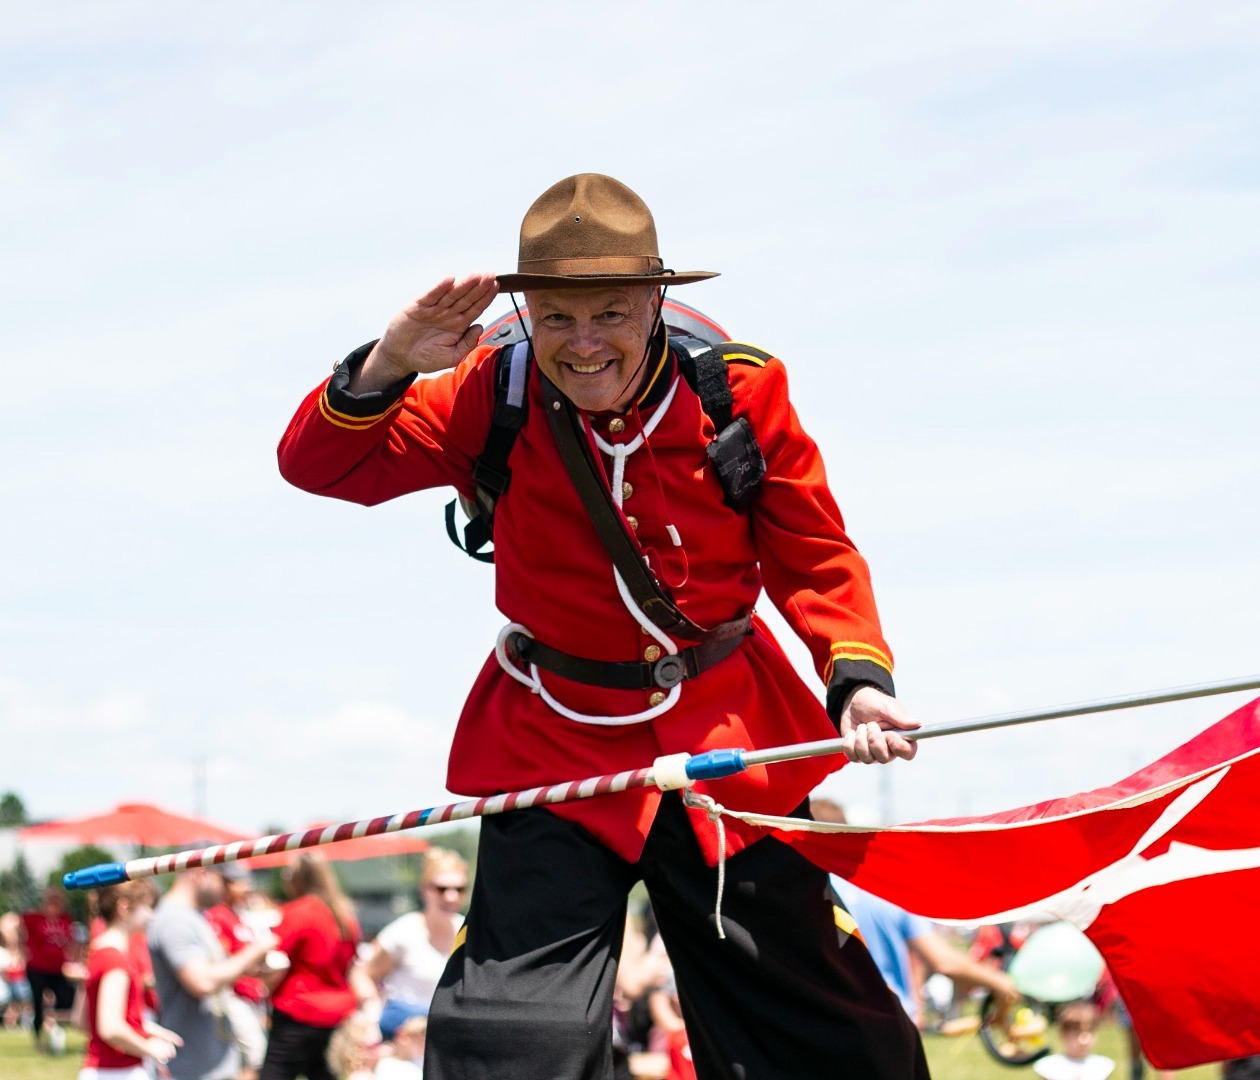 Mountie on Stilts at Canada Day Event